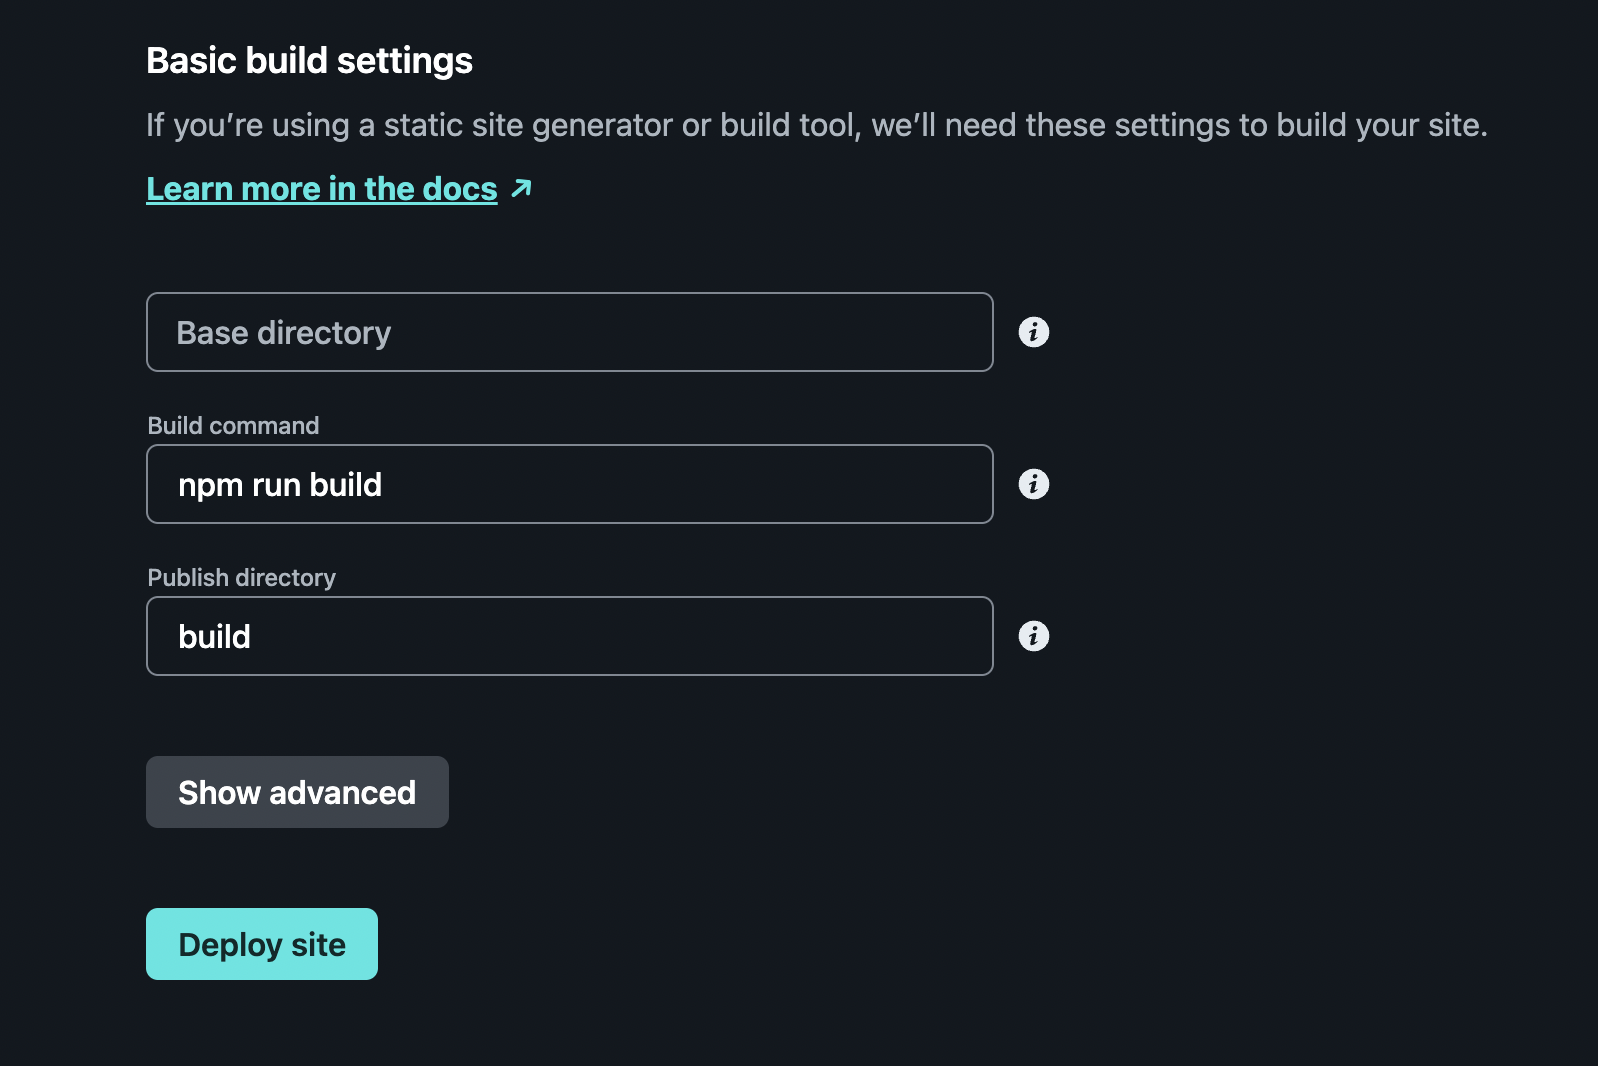 Choosing the build settings to create your site